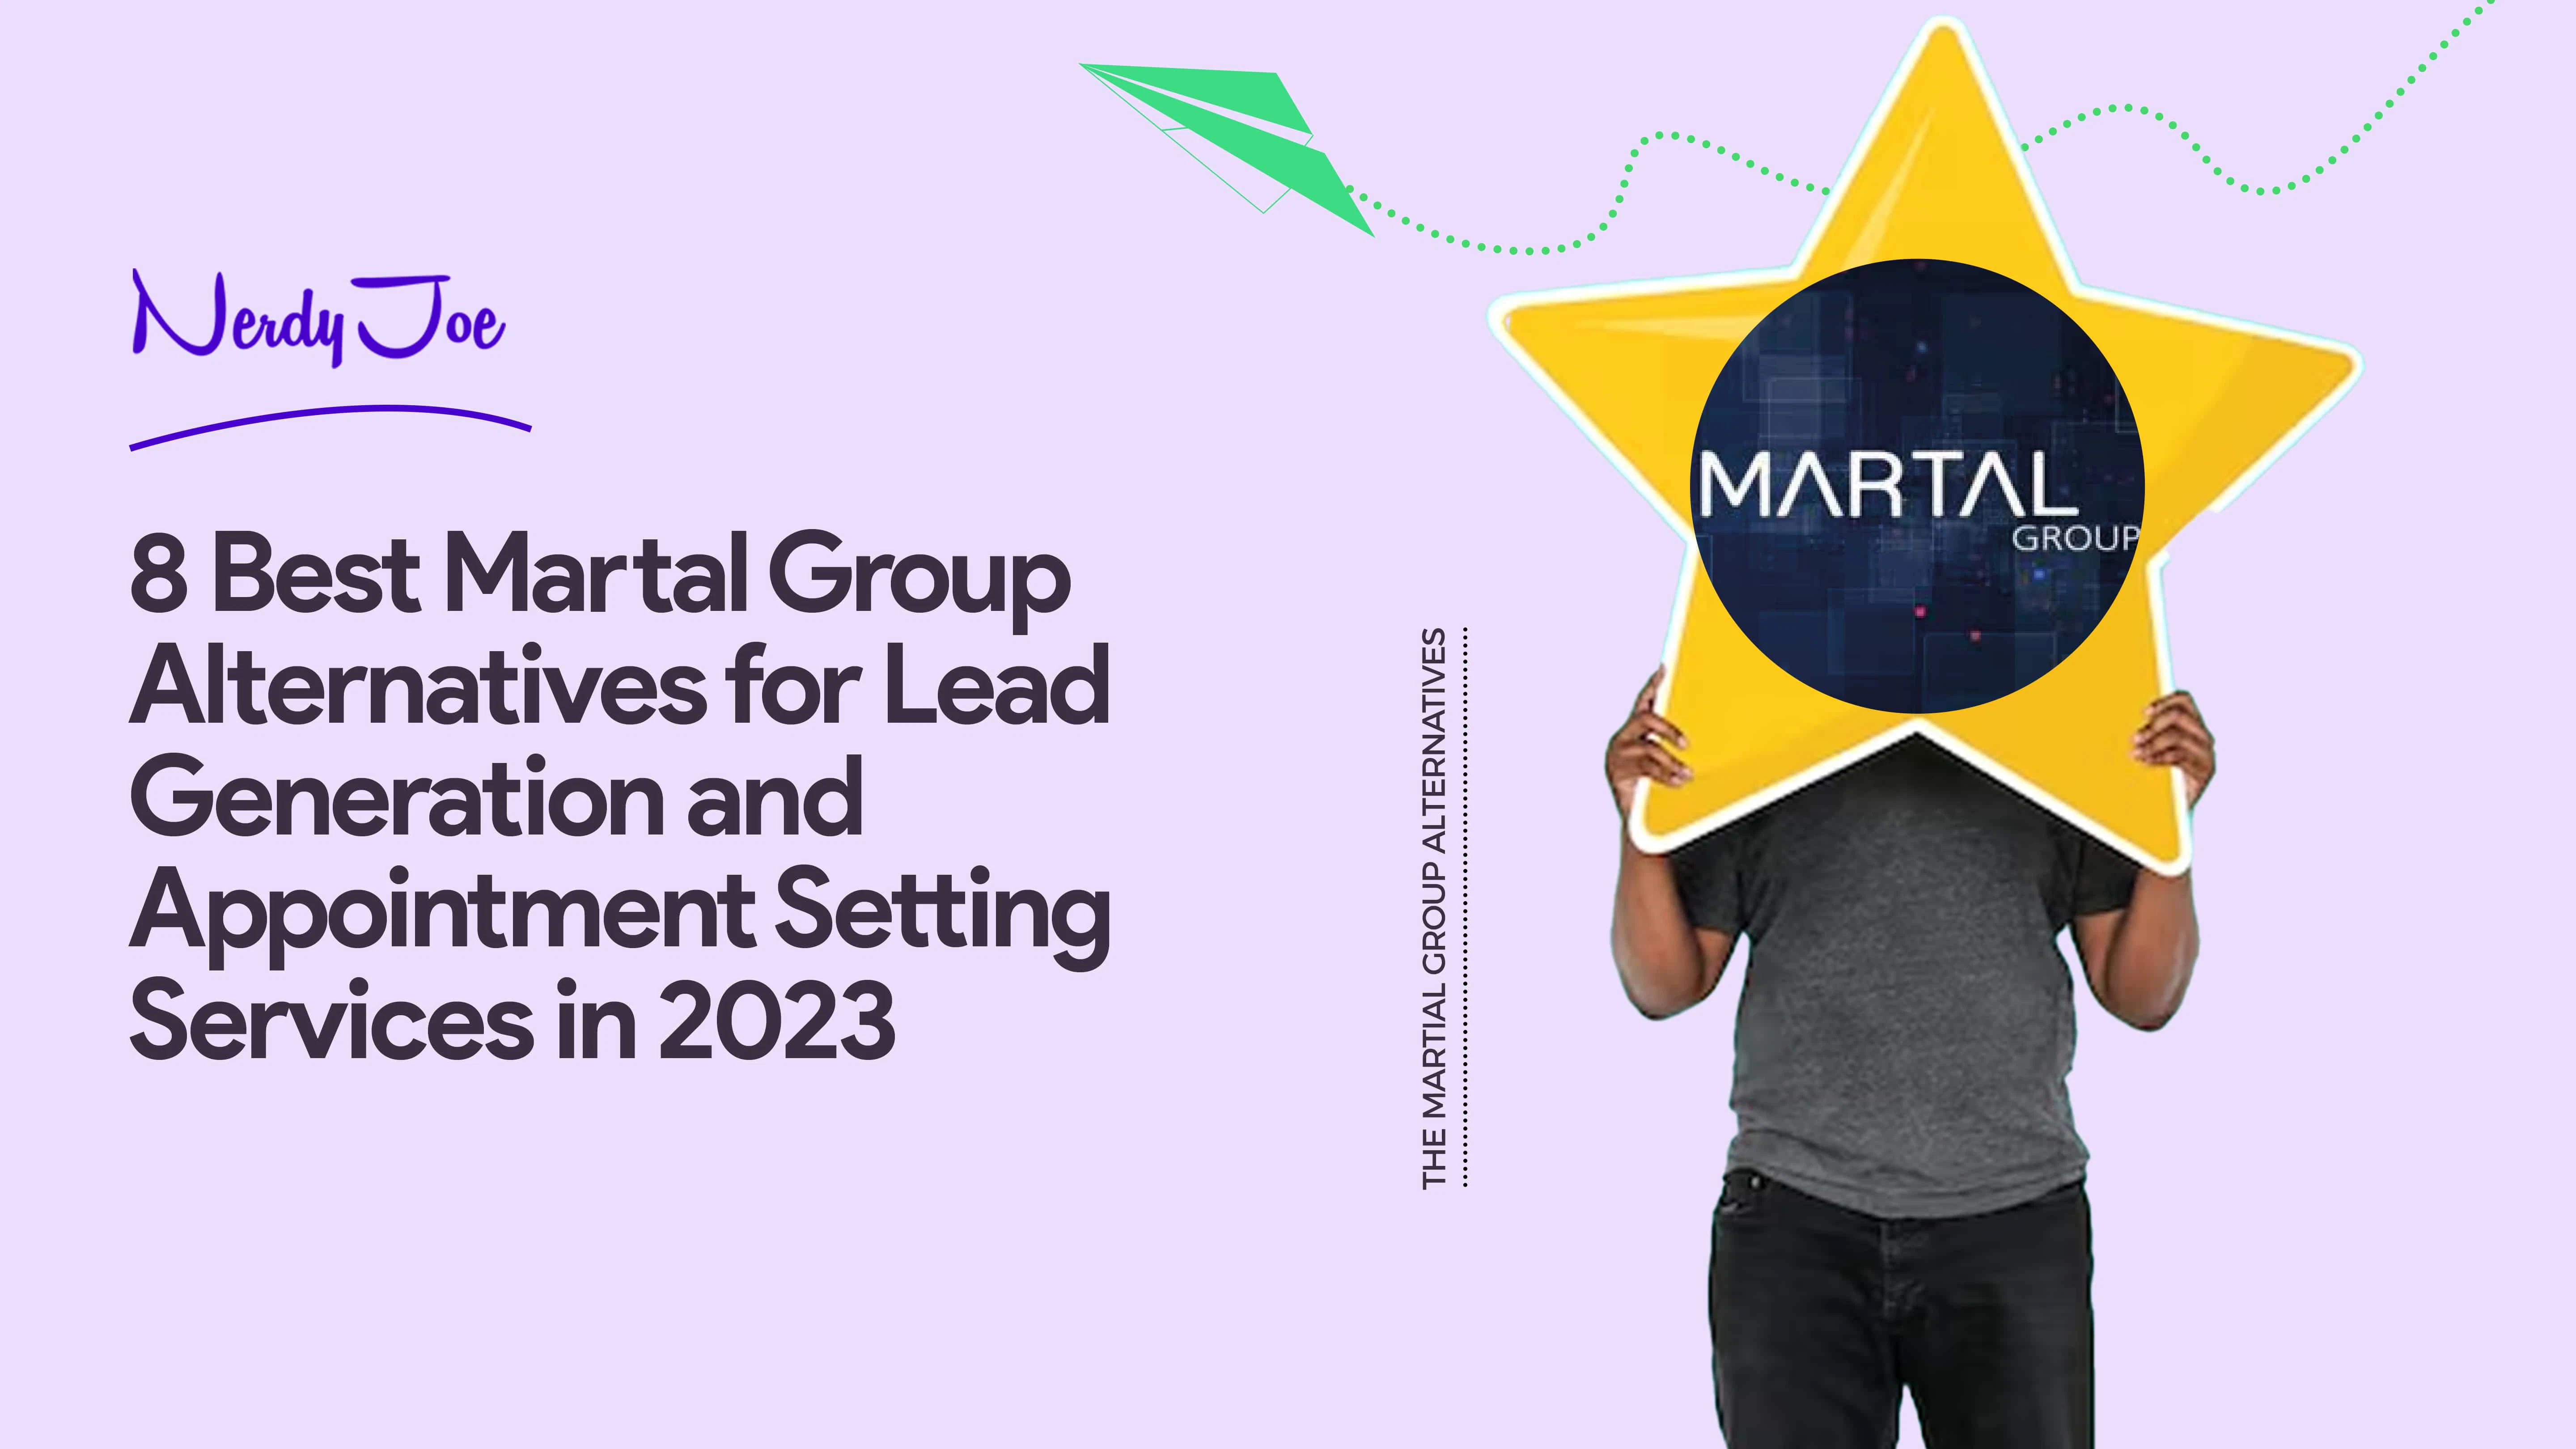 8 Best Martal Group Alternatives for Lead Generation and Appointment Setting Services in 2023